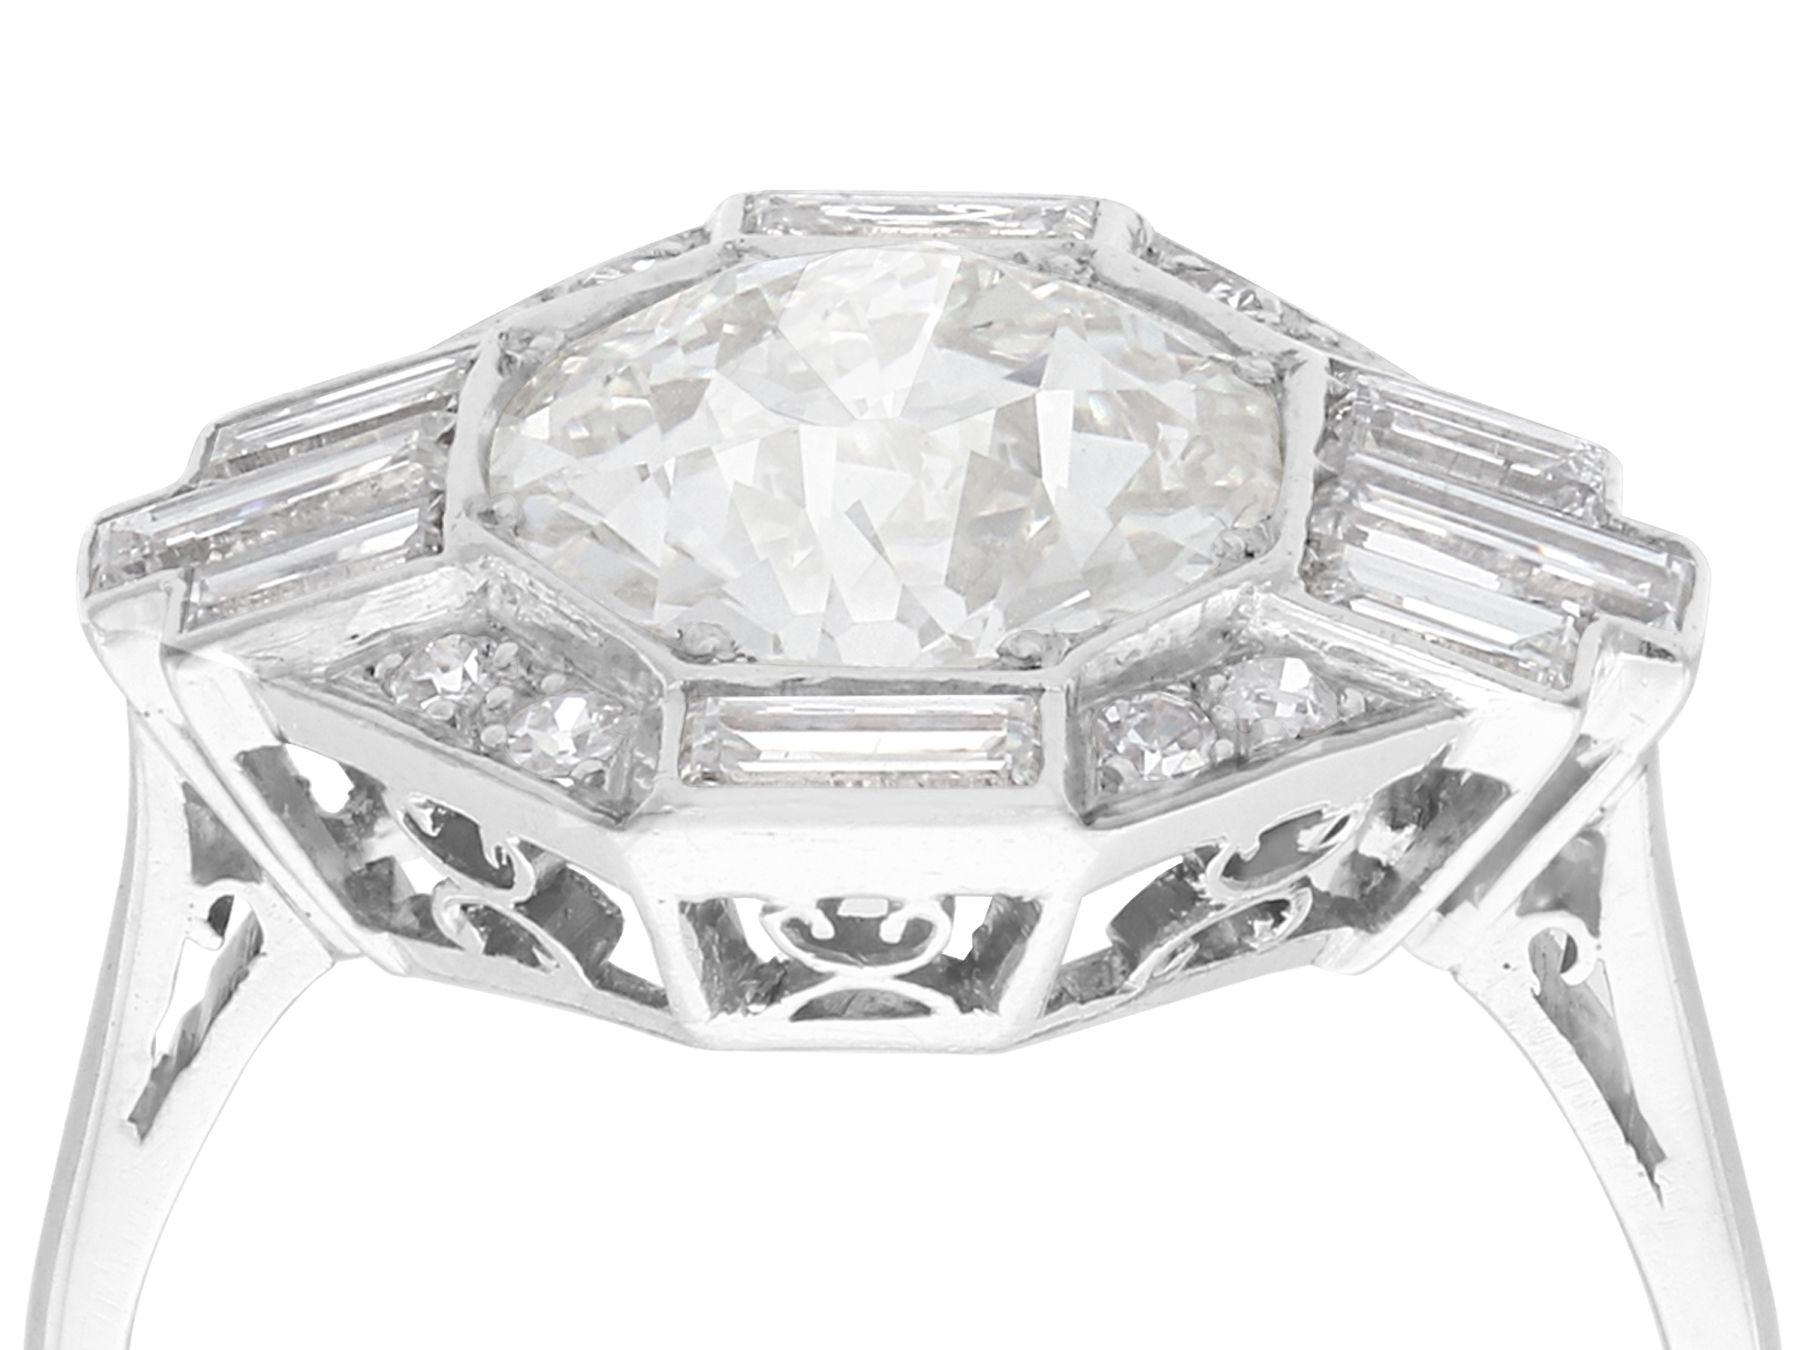 A stunning, fine and impressive antique 3.75 carat Art Deco diamond ring in platinum; part of our diverse jewelry and estate jewelry collections.

This stunning antique Art Deco diamond ring has been crafted in platinum.

The Art Deco setting